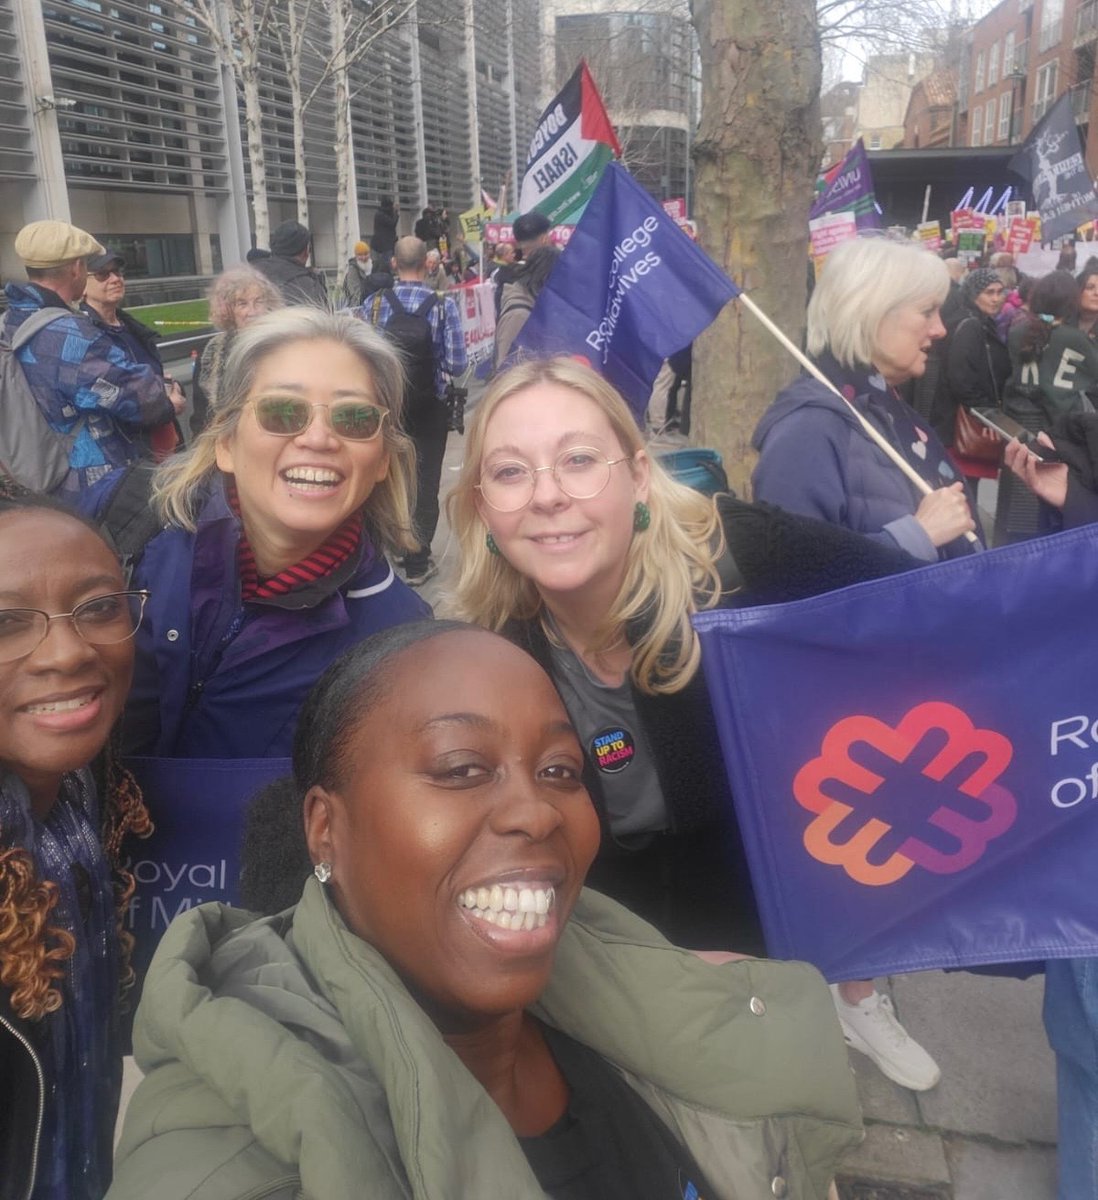 @MidwivesRCM stand up to racism at the UN anti racism day demo in London #RaceMatters